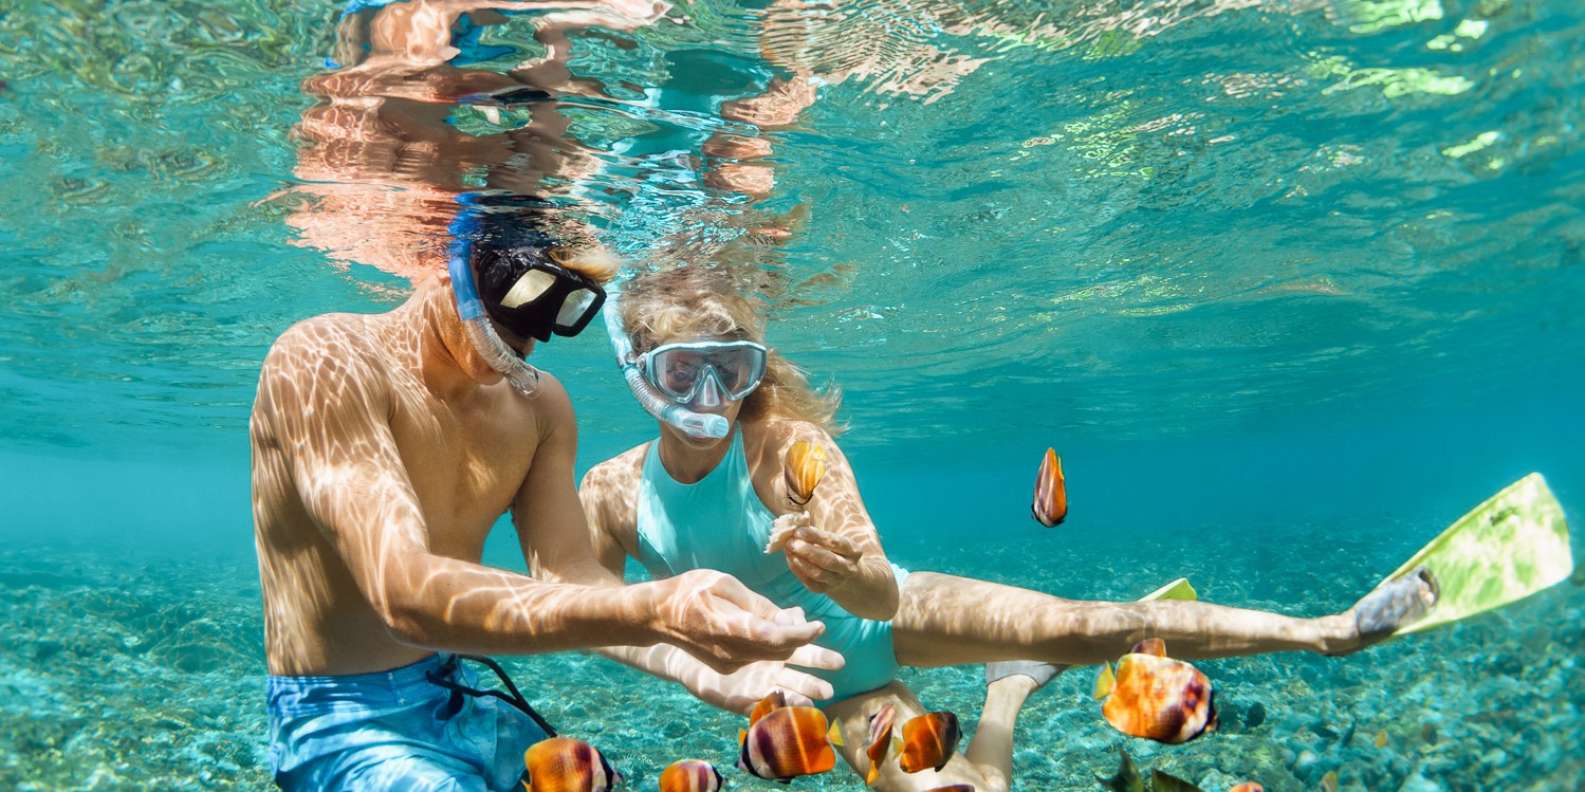 Maui: Afternoon Snorkel to Coral Gardens or Molokini Crater | GetYourGuide